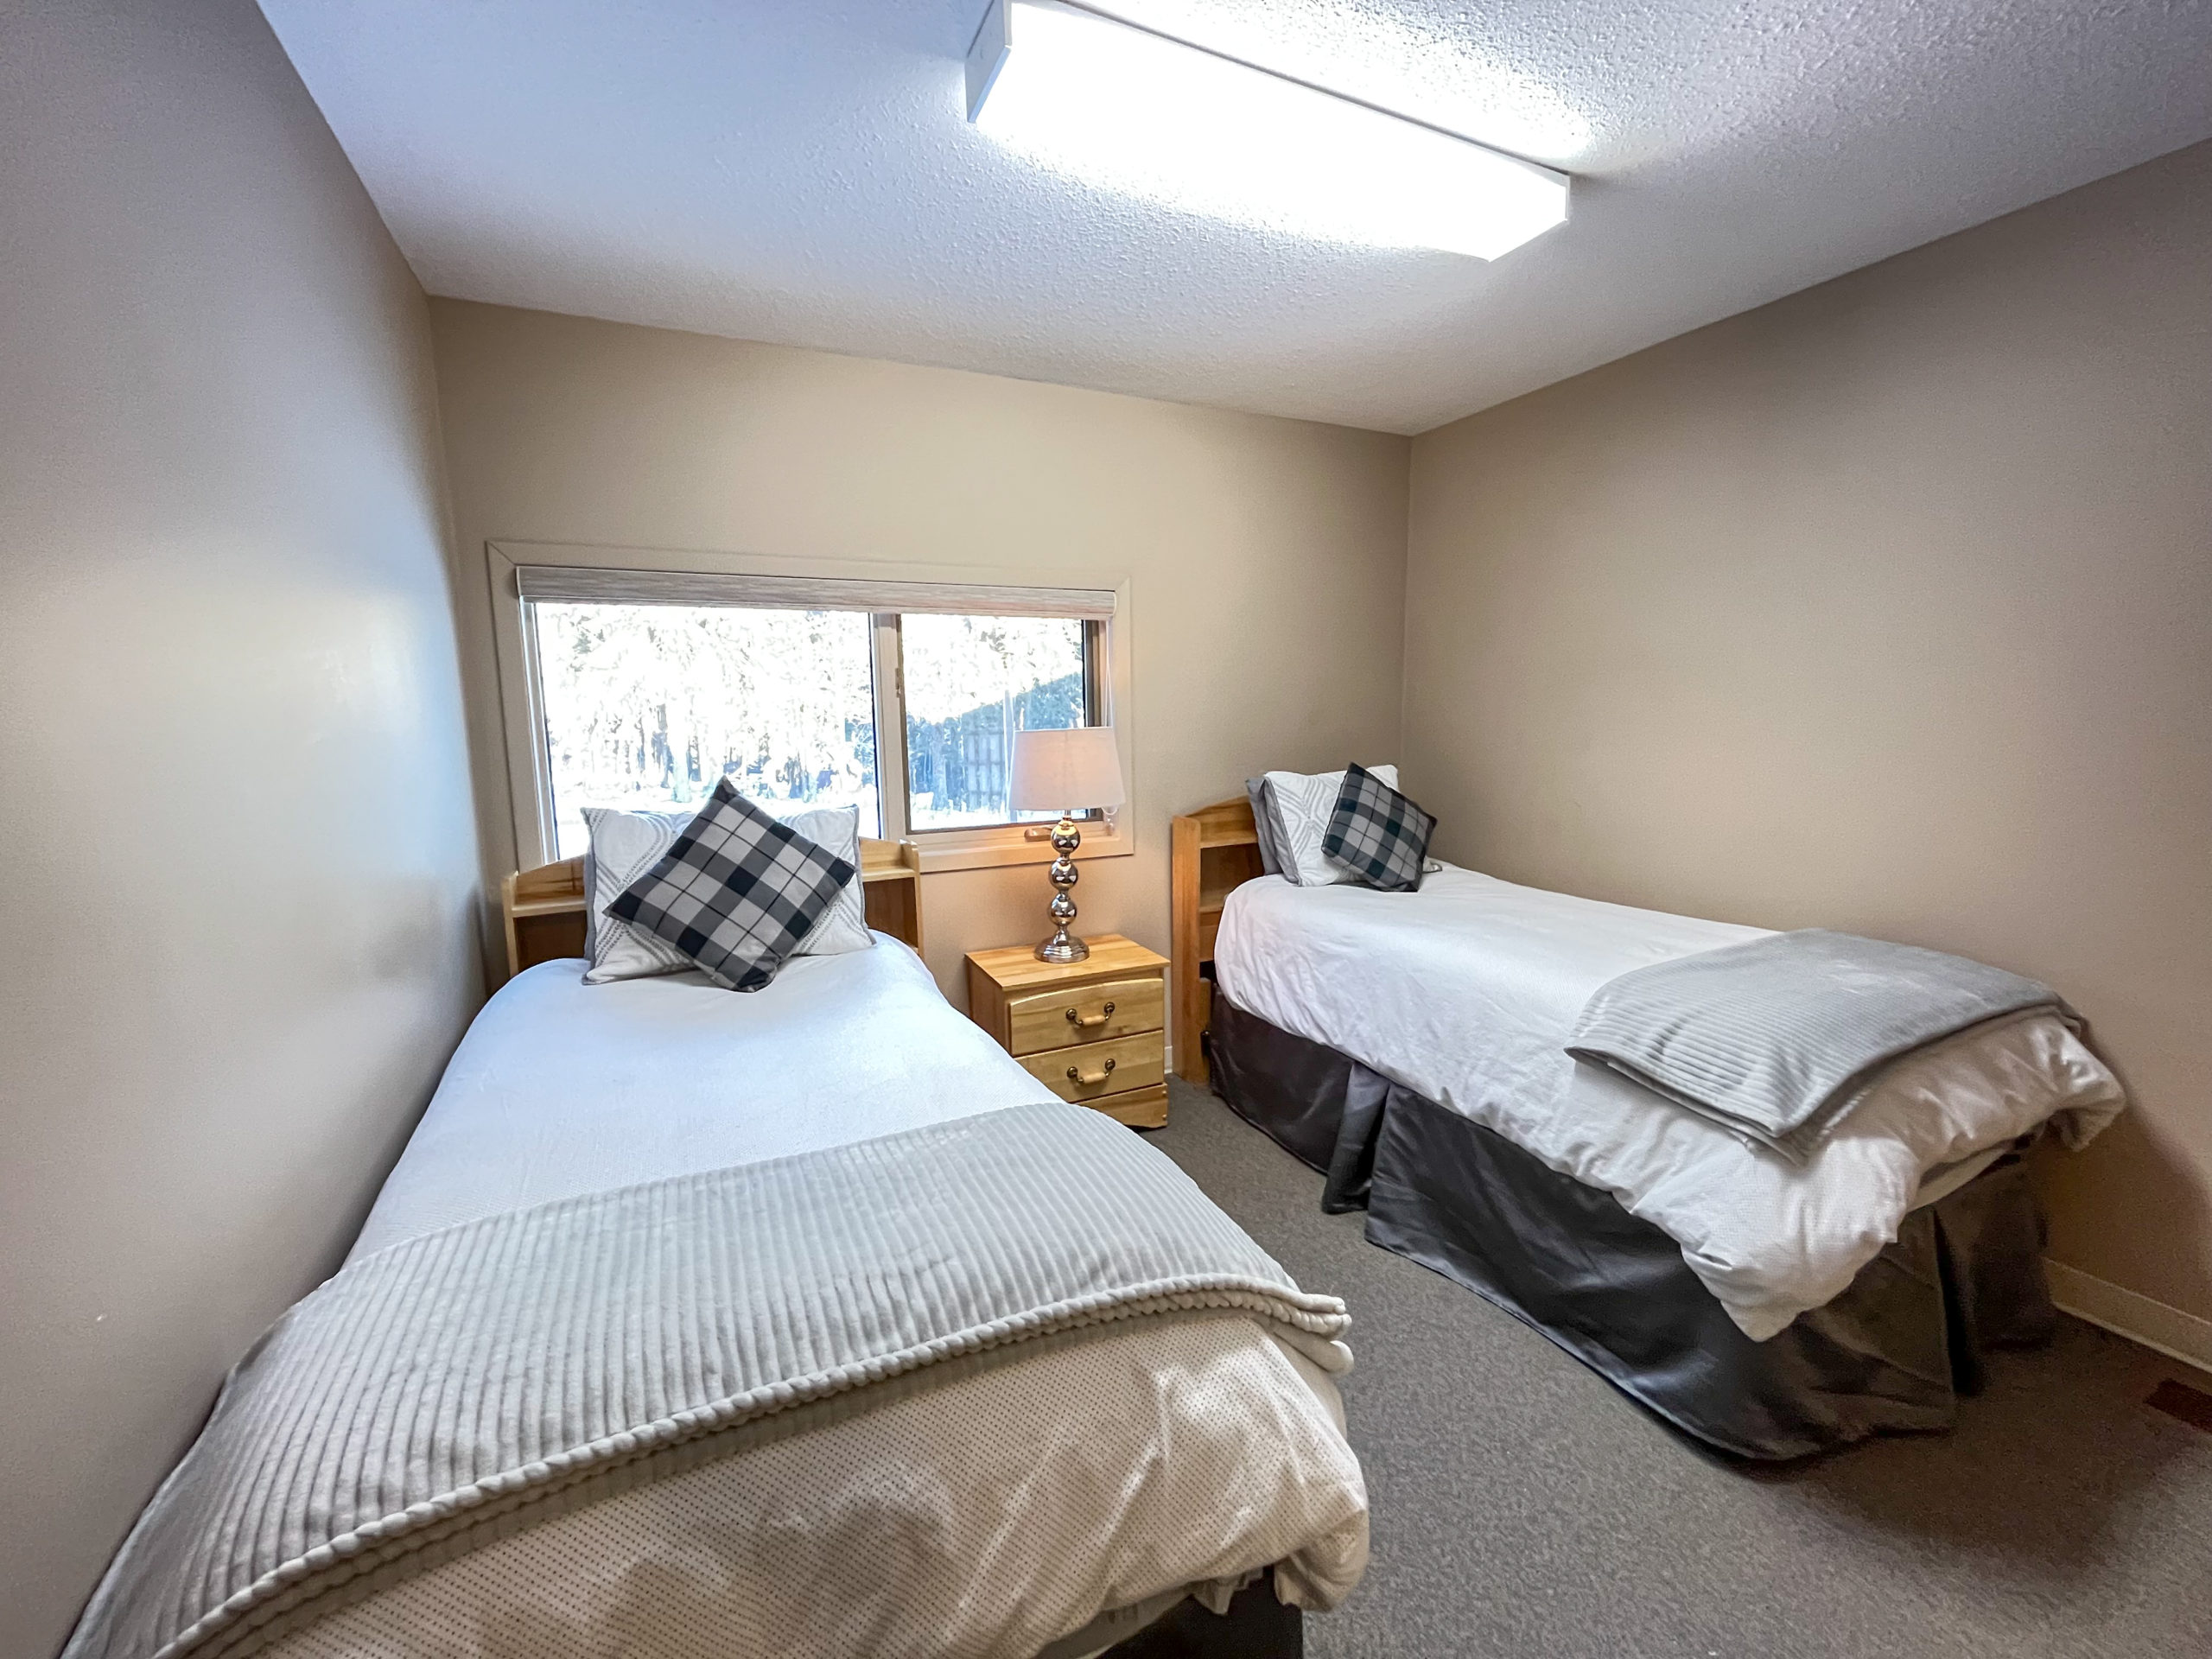 E Double Bedroom - The Salvation Army's Pine Lake Camp